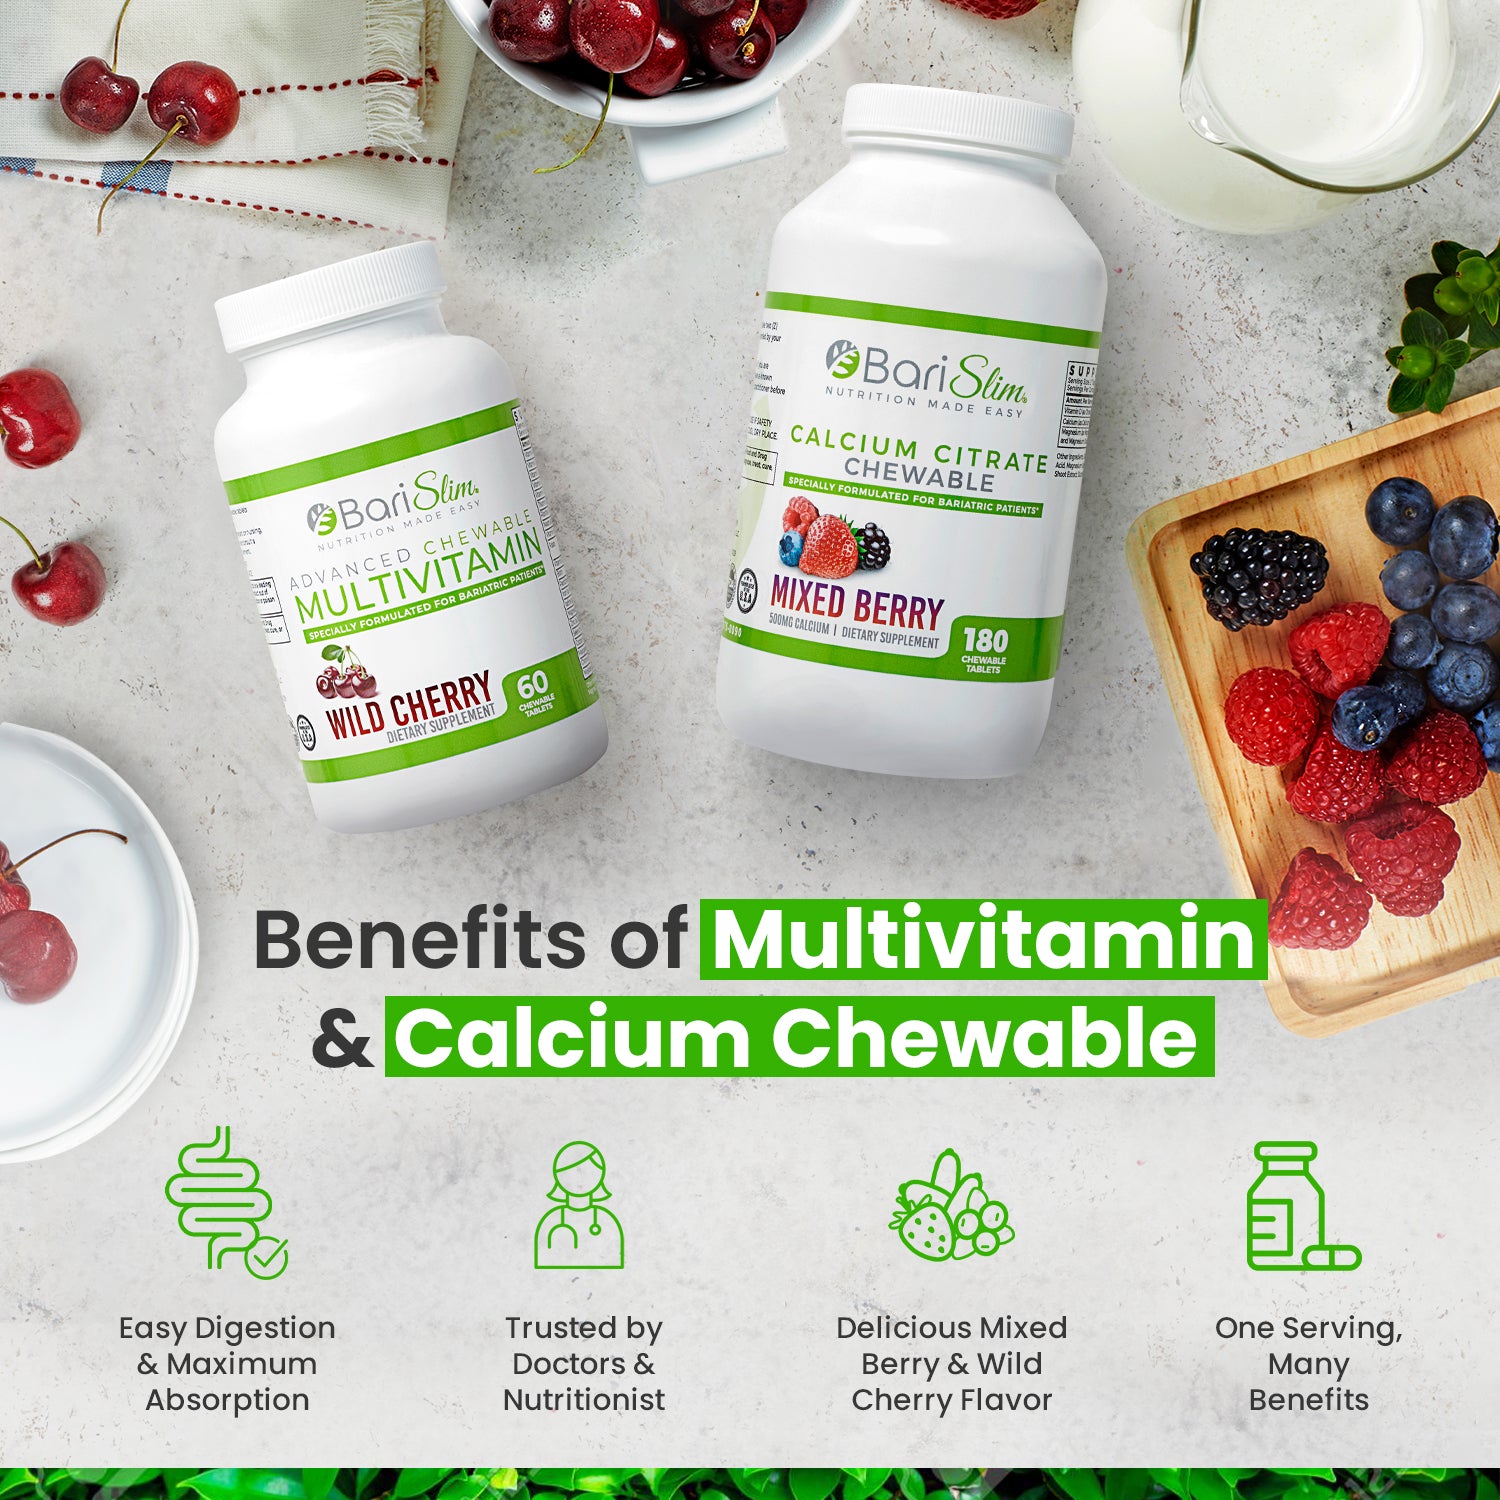 Advanced Multivitamin and Calcium Citrate Combo (Wild Cherry & Mixed Berry)